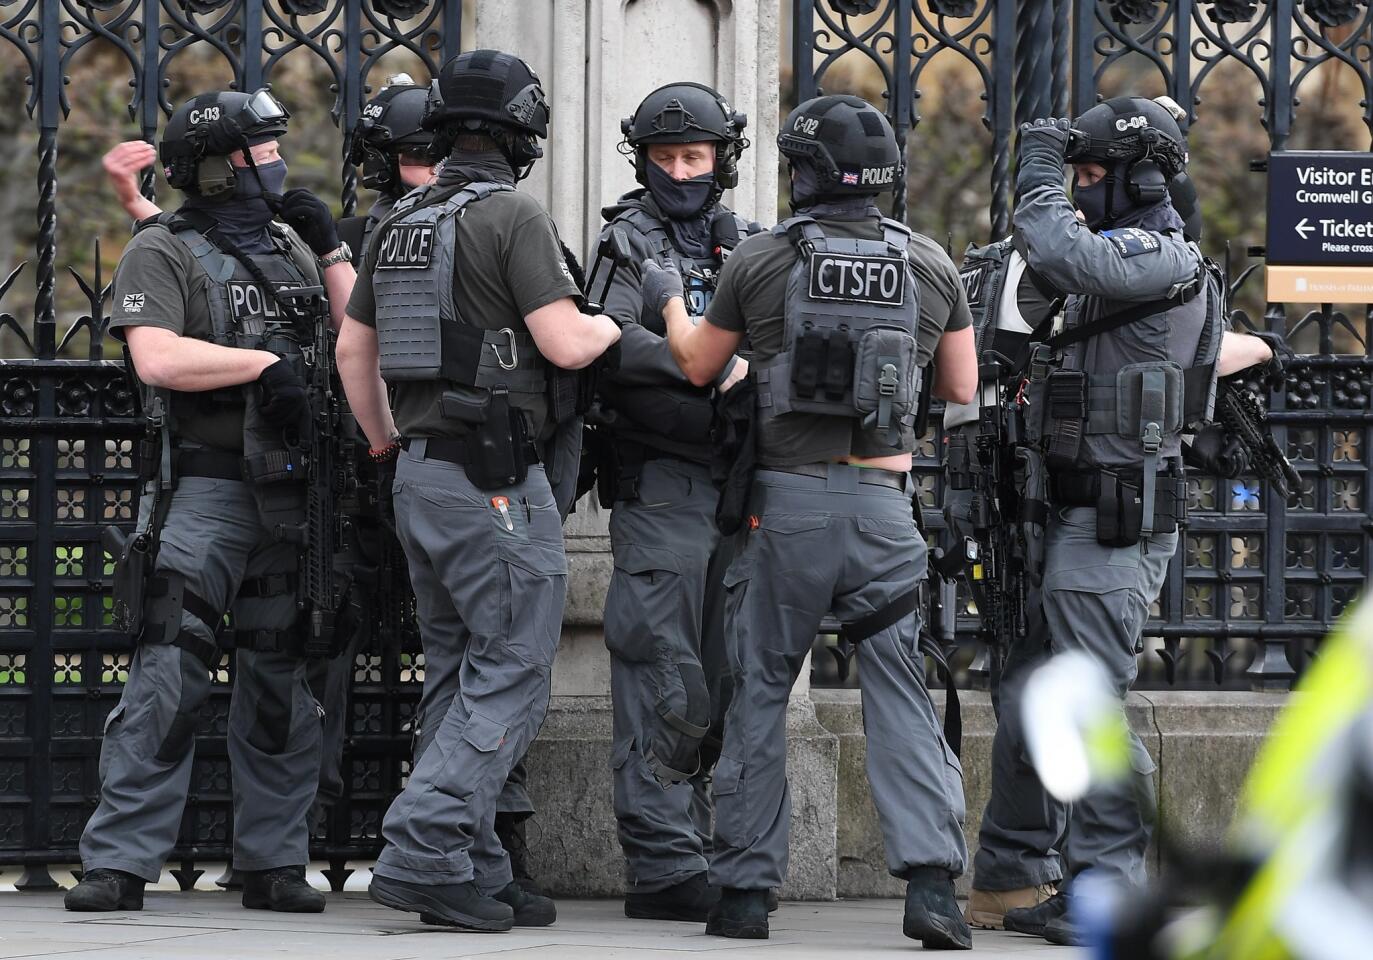 Incidents outside Houses of Parliament